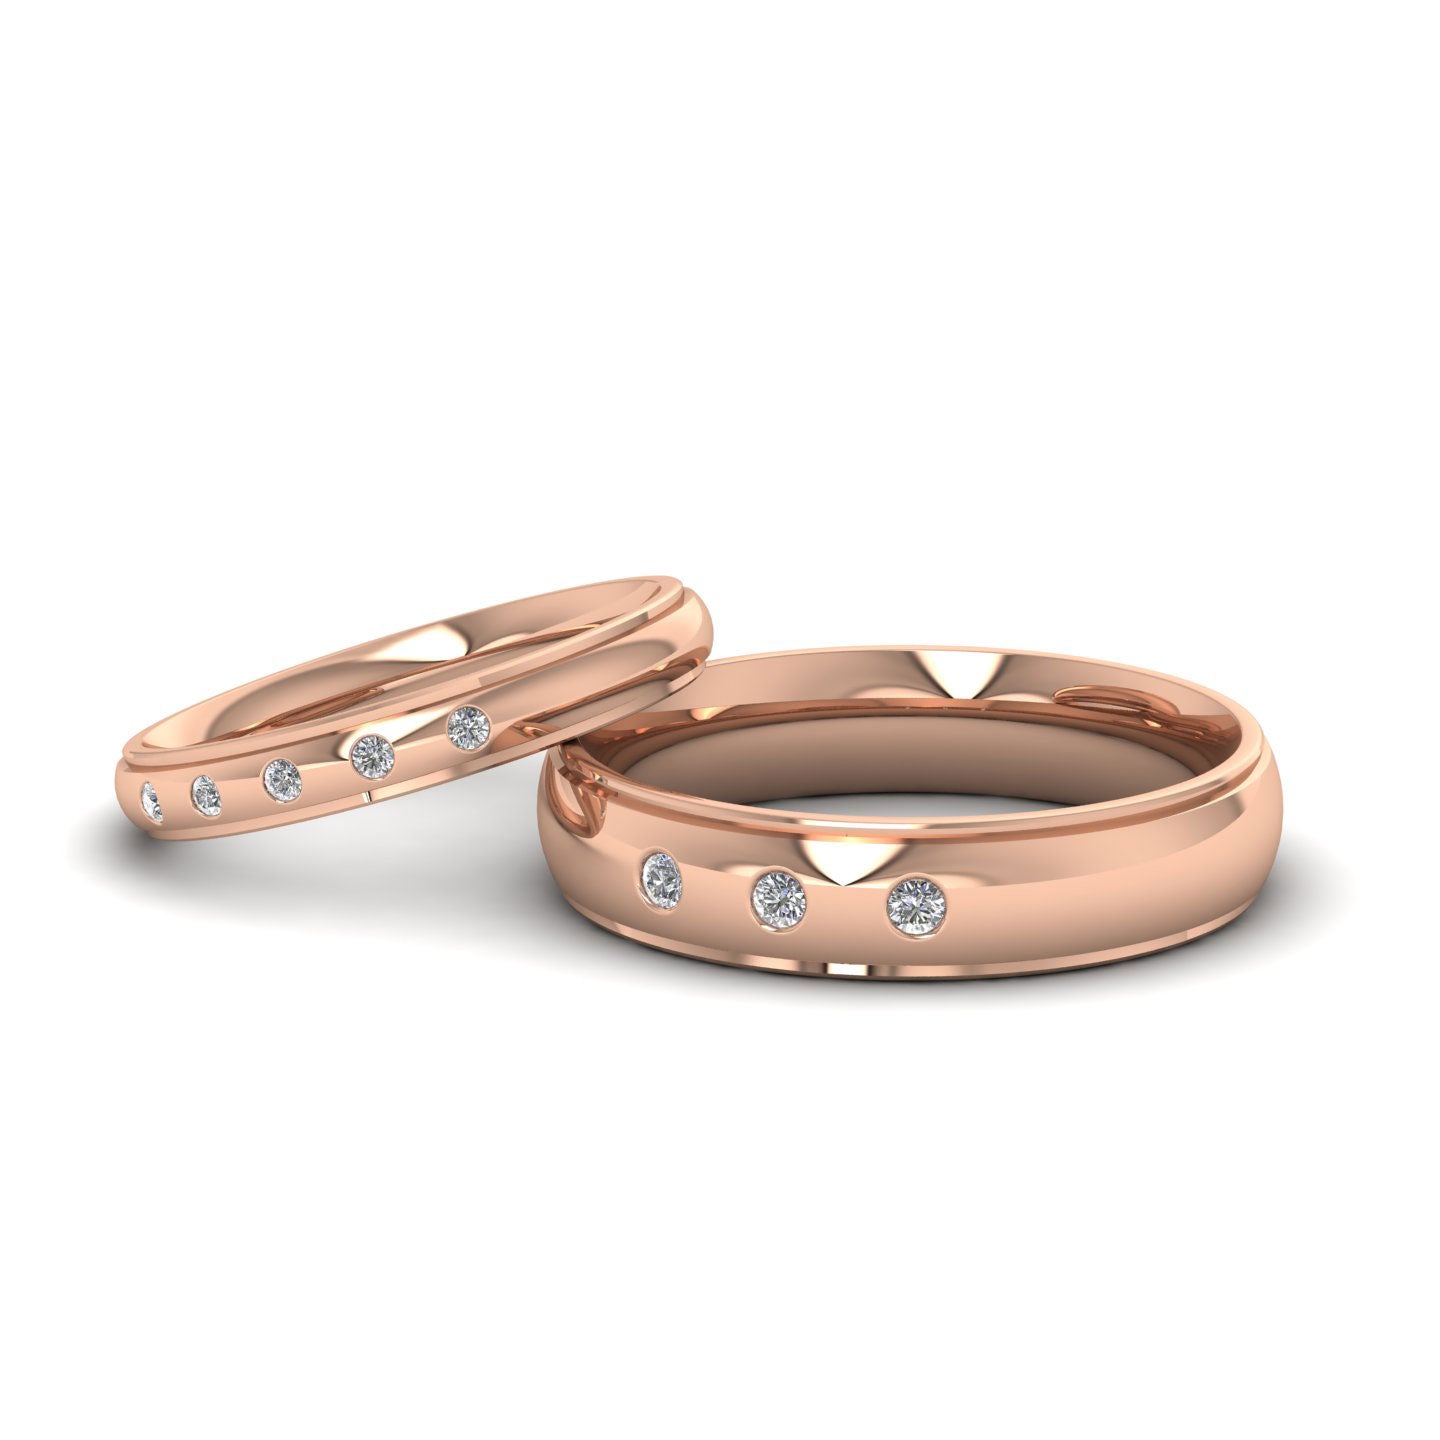 Line Pattern And Five Diamond Set 9ct Rose Gold 3mm Wedding Ring